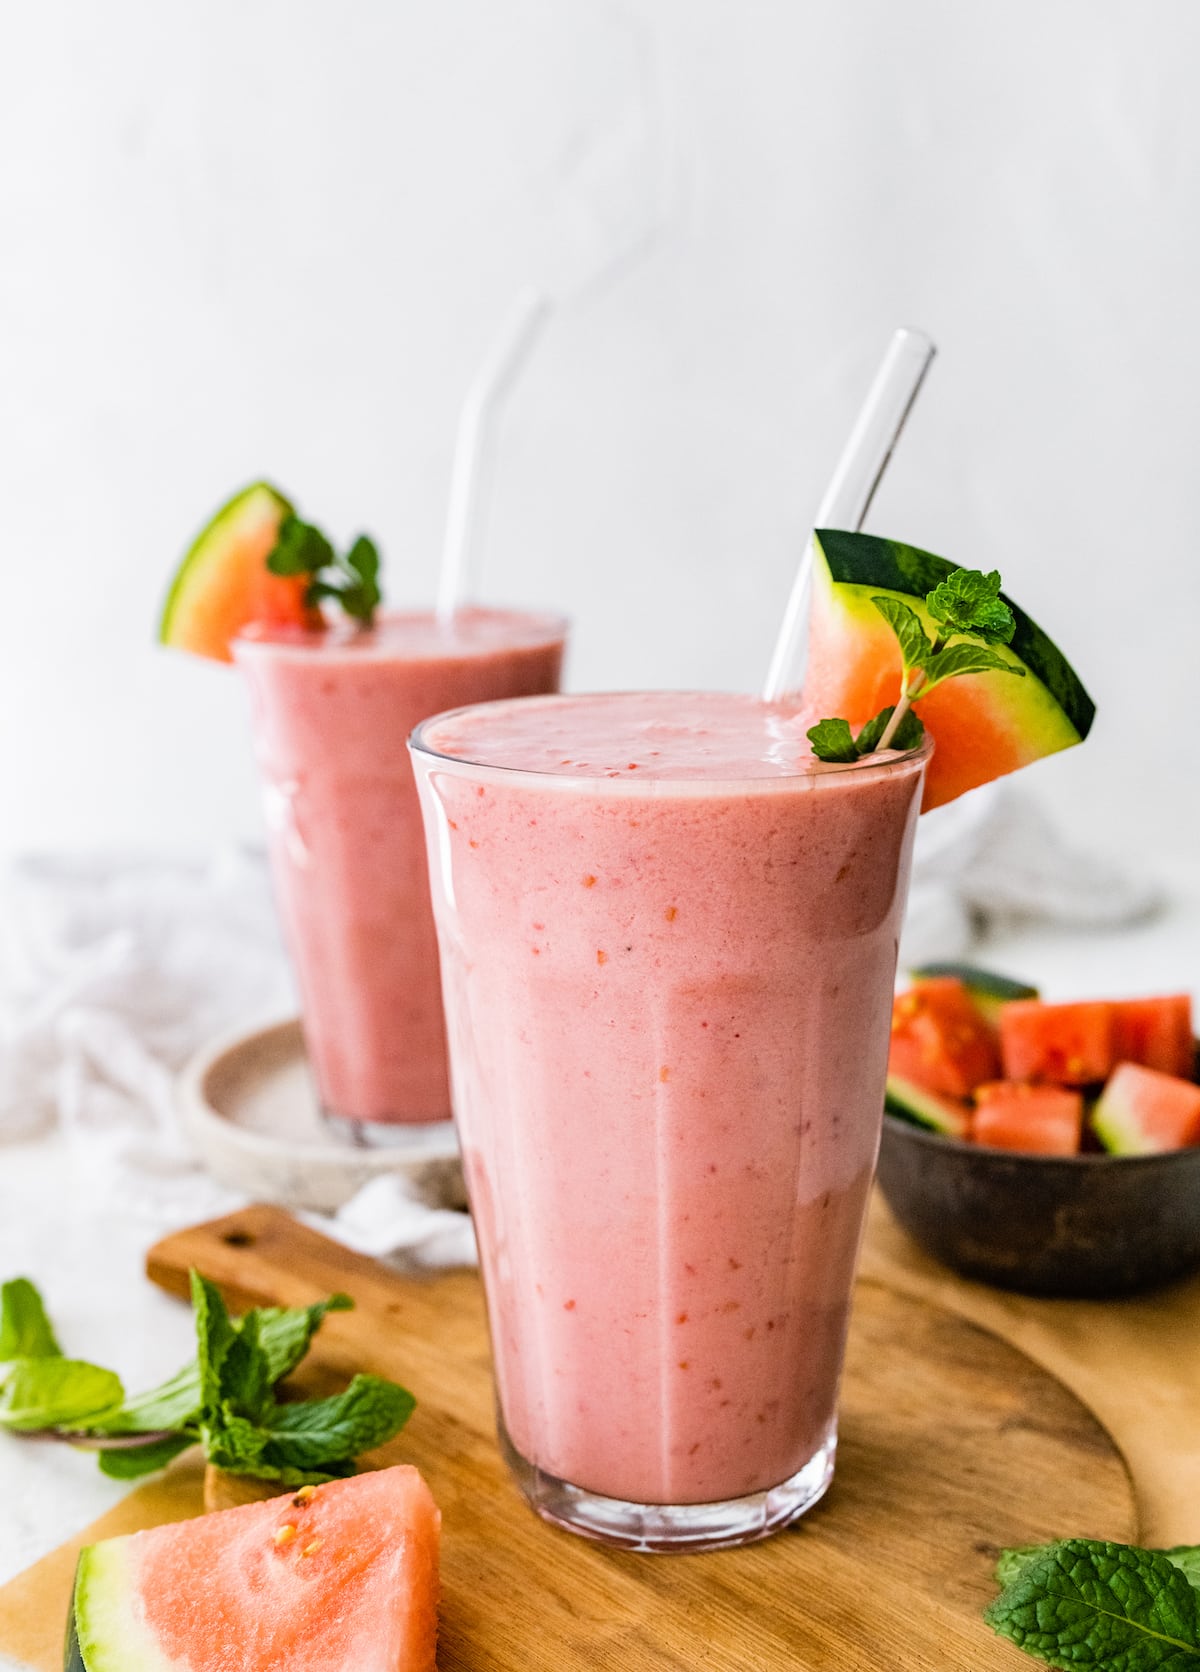 Two watermelon smoothies with straws and slices of fresh watermelon.